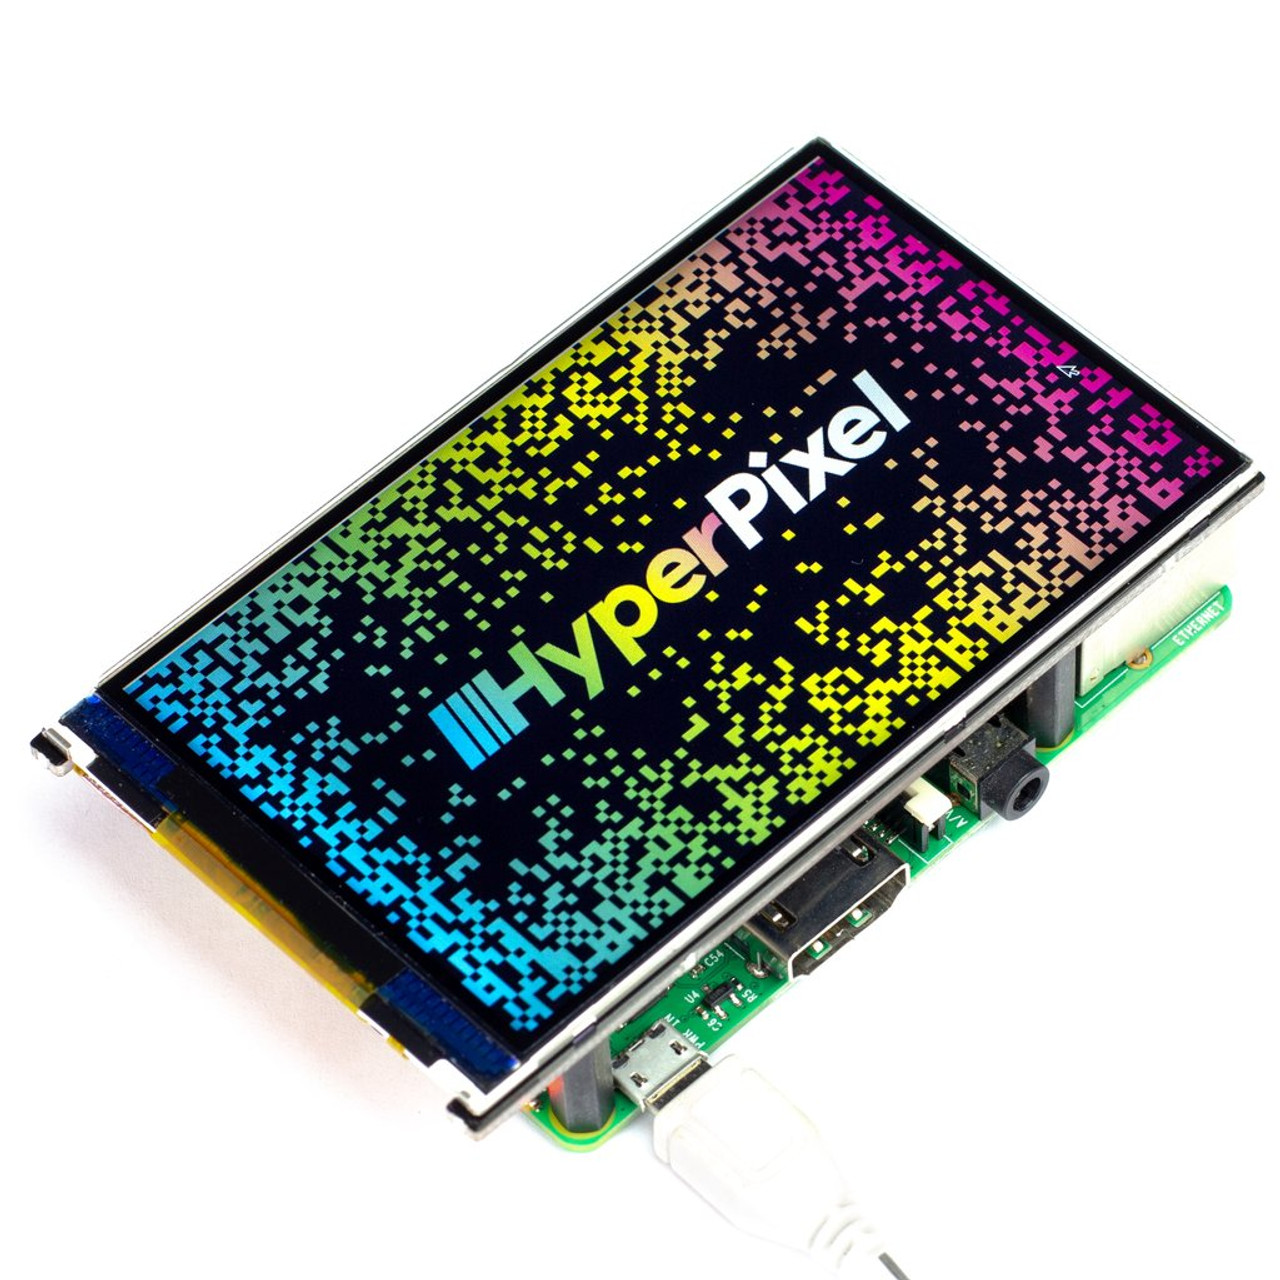 Non-Touch - HyperPixel 4.0 - Hi-Res Display for Raspberry Pi